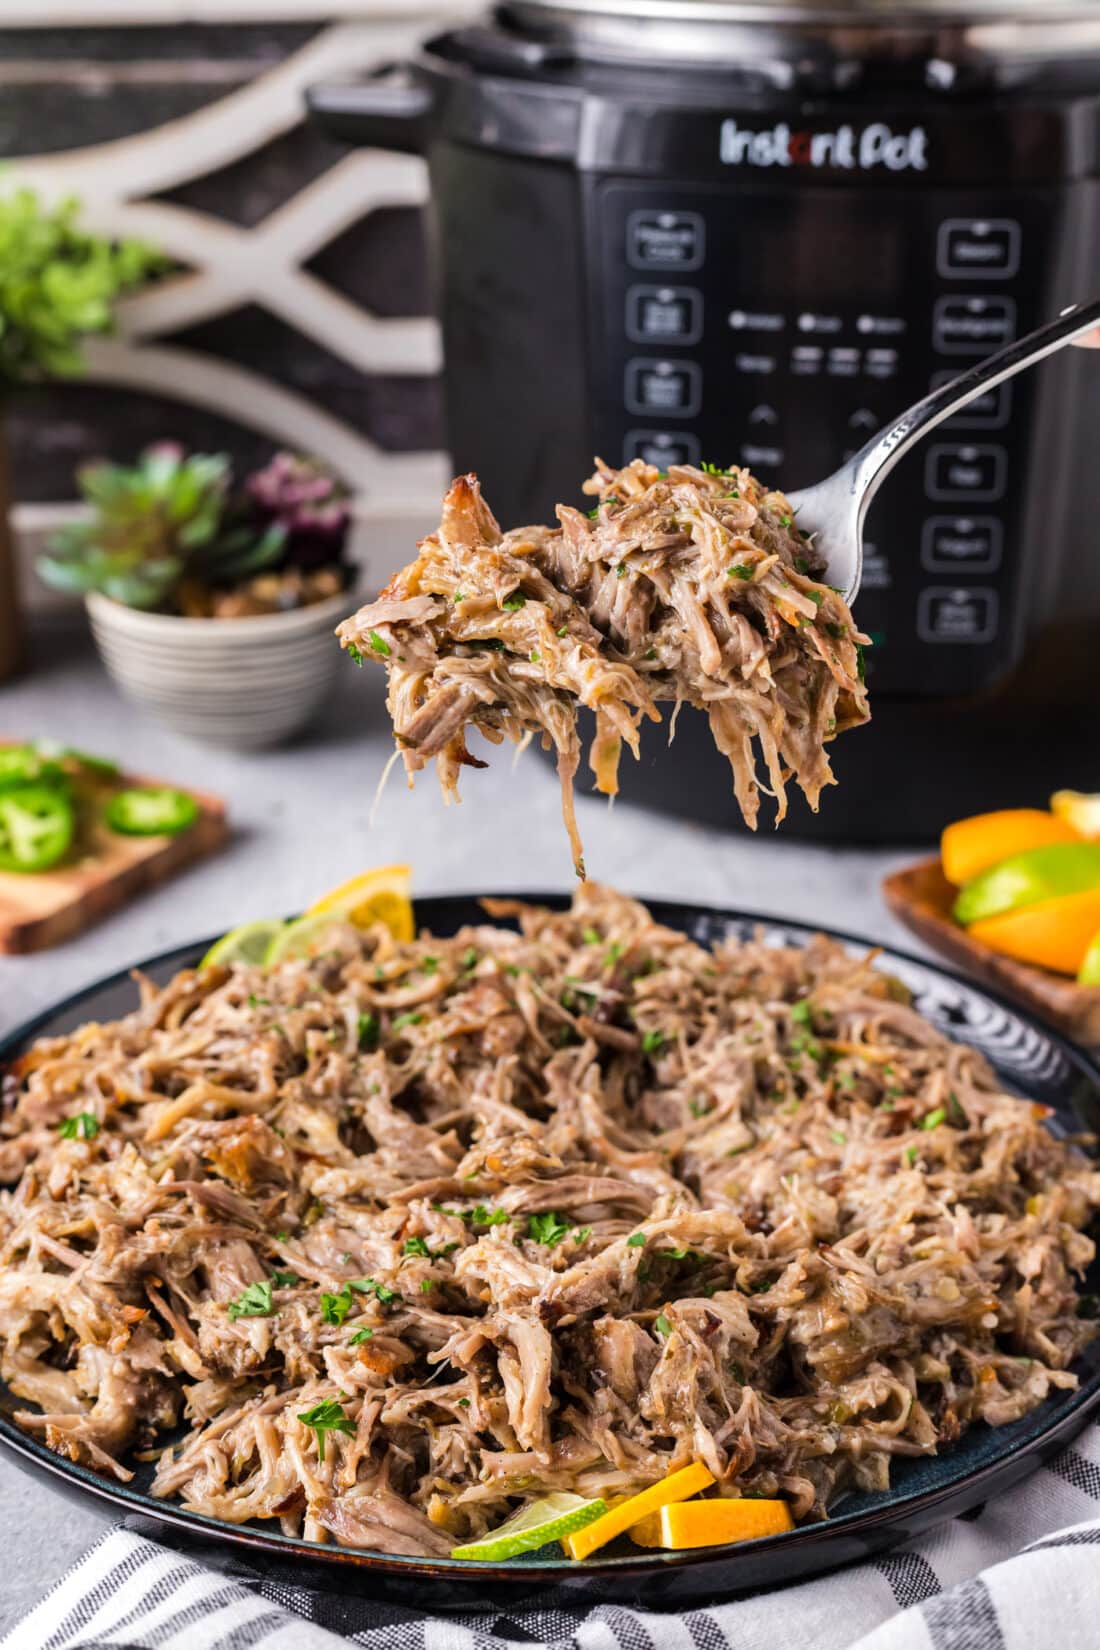 Forkful of Instant Pot Carnitas held above a plate of Instant Pot Carnitas